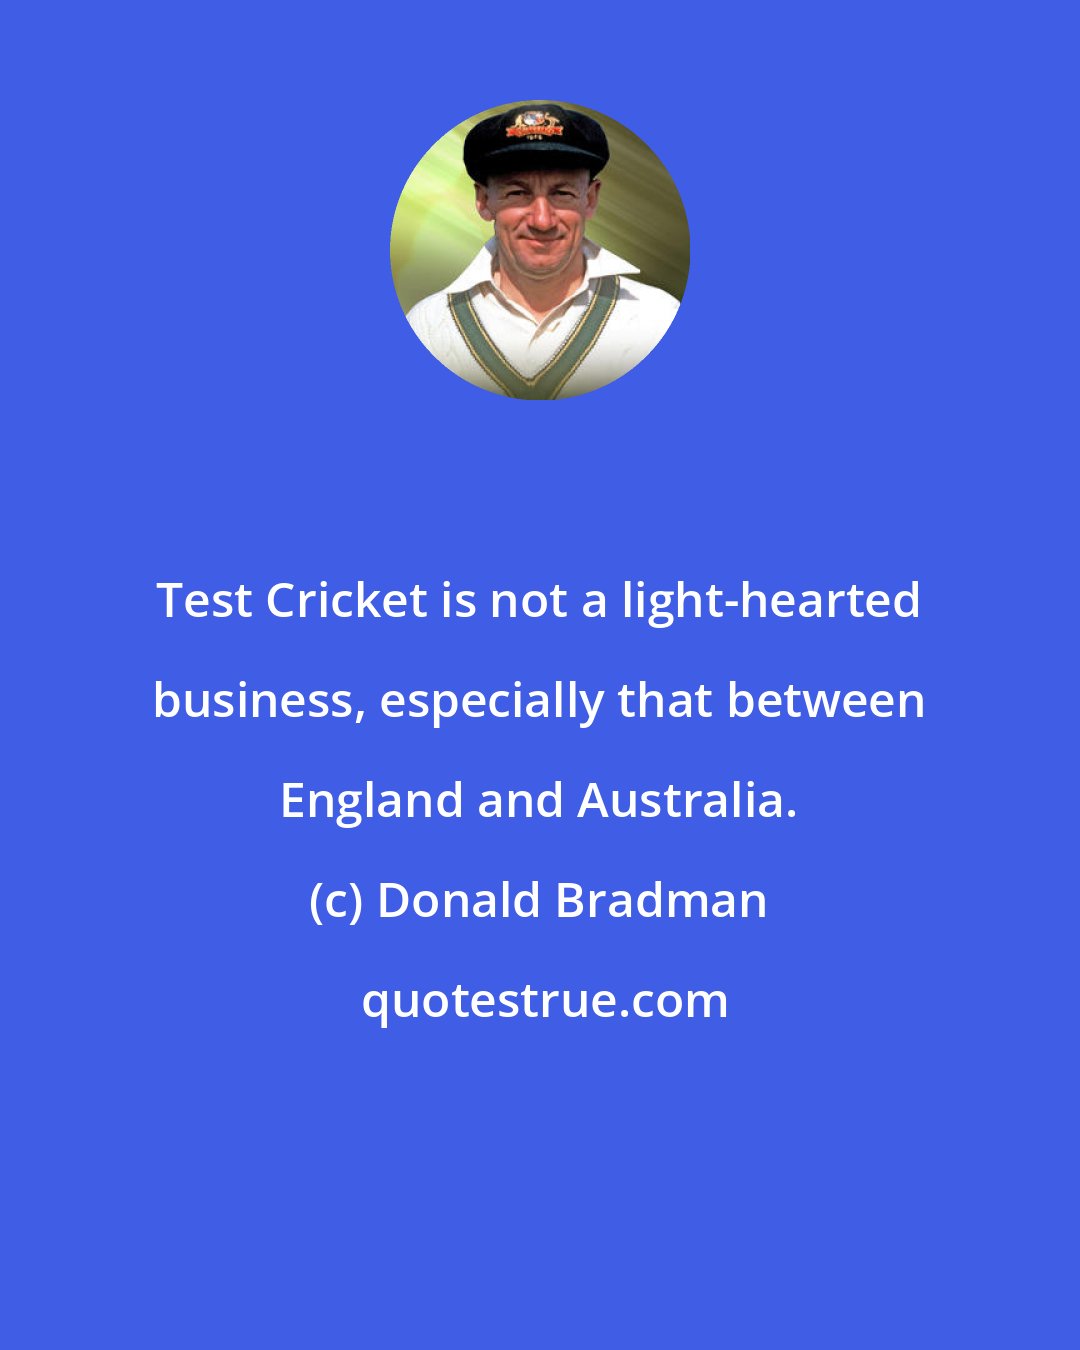 Donald Bradman: Test Cricket is not a light-hearted business, especially that between England and Australia.